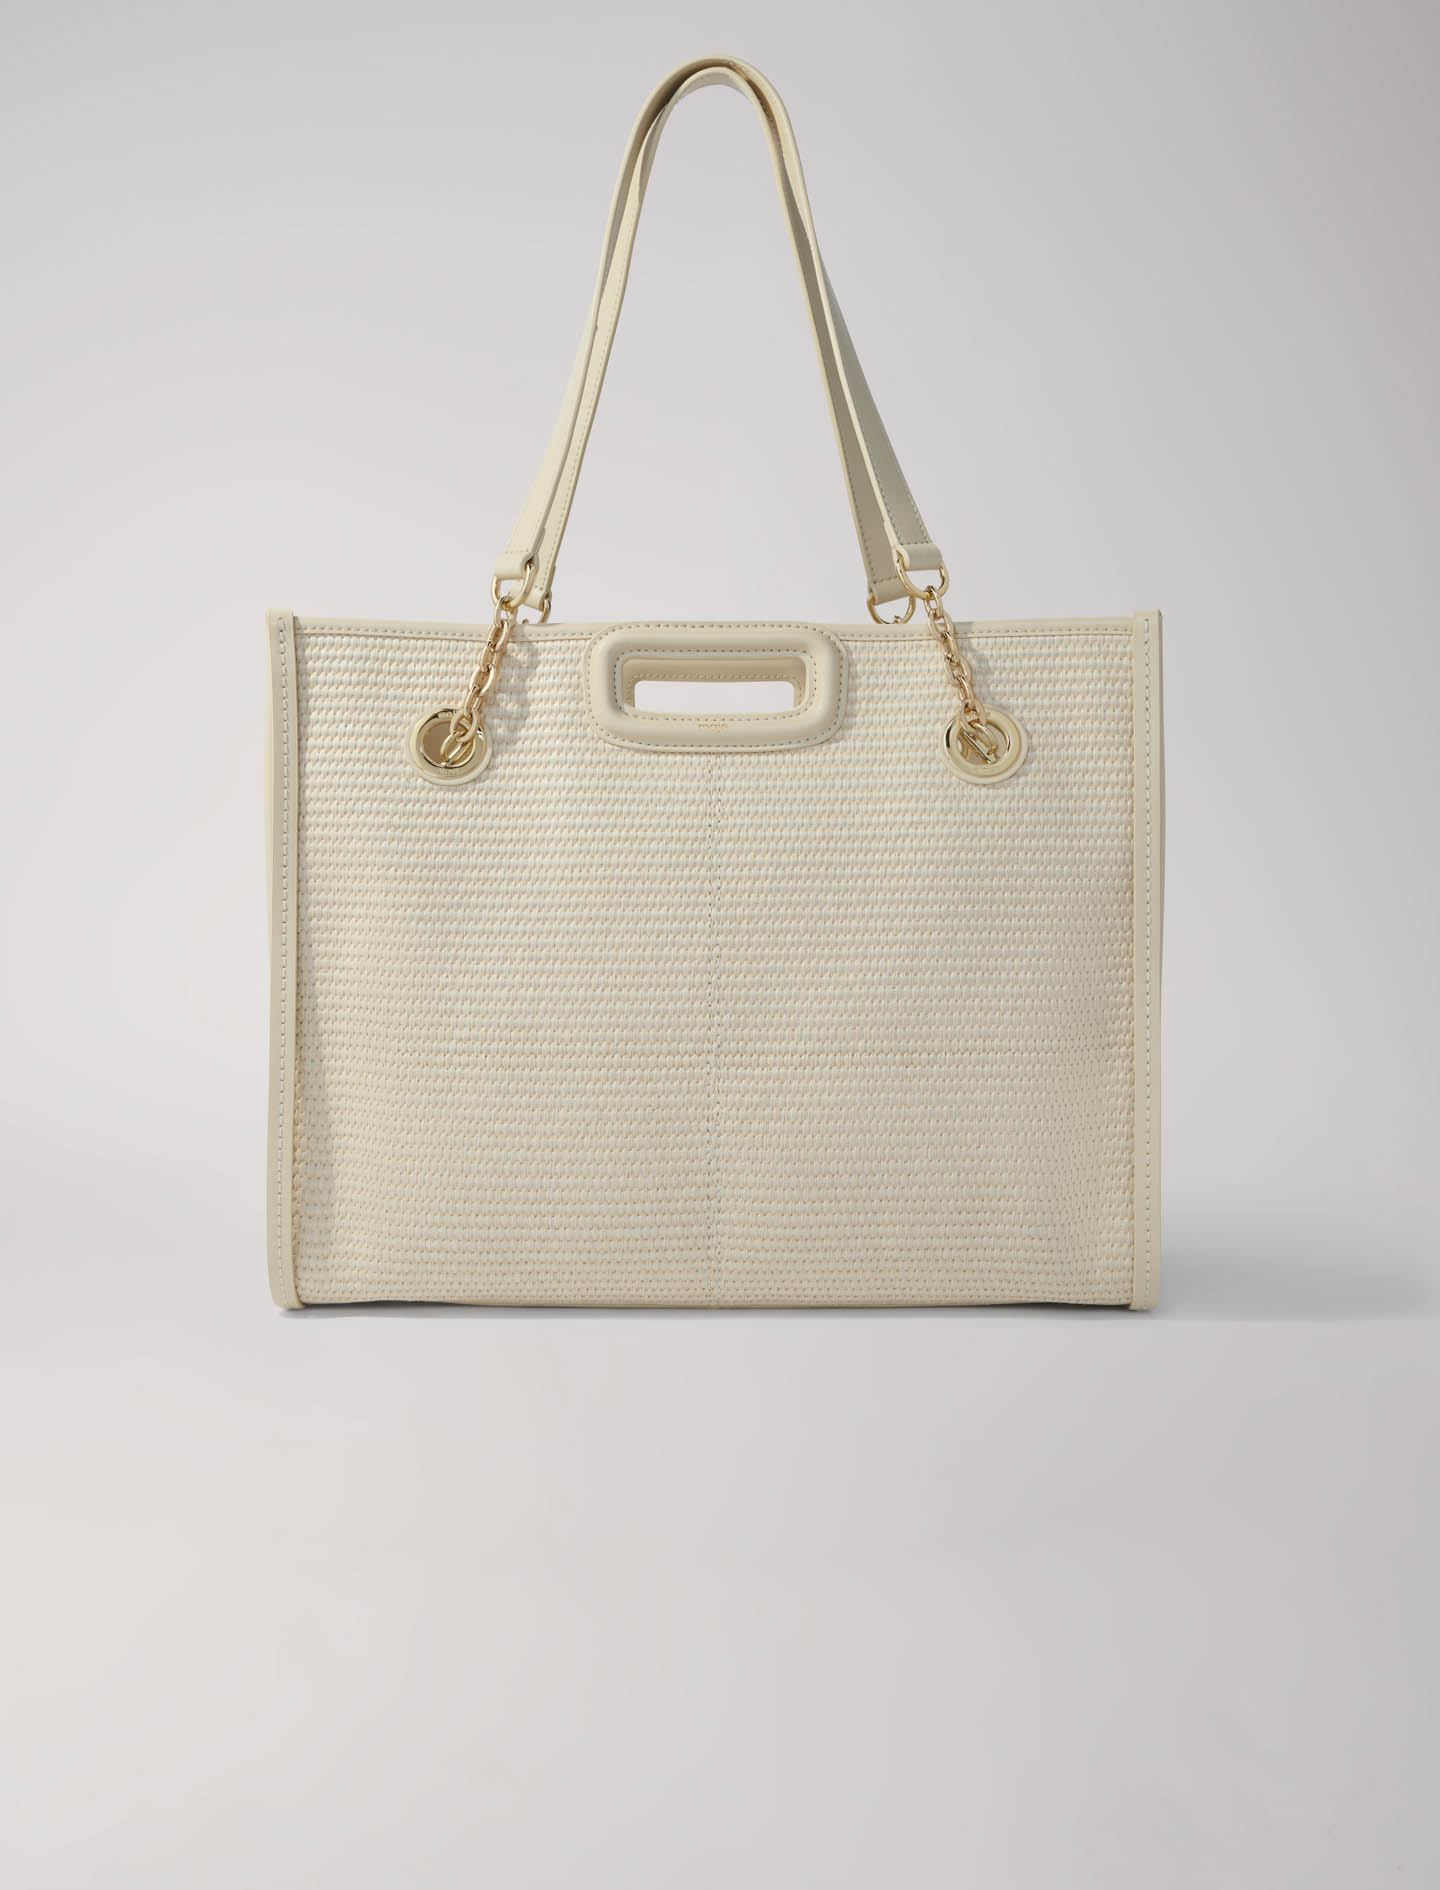 Mixte's polypropylene, Raffia-effect textile tote bag for Spring/Summer, size Mixte-All Bags-OS (ONE SIZE), in color Beige / Beige